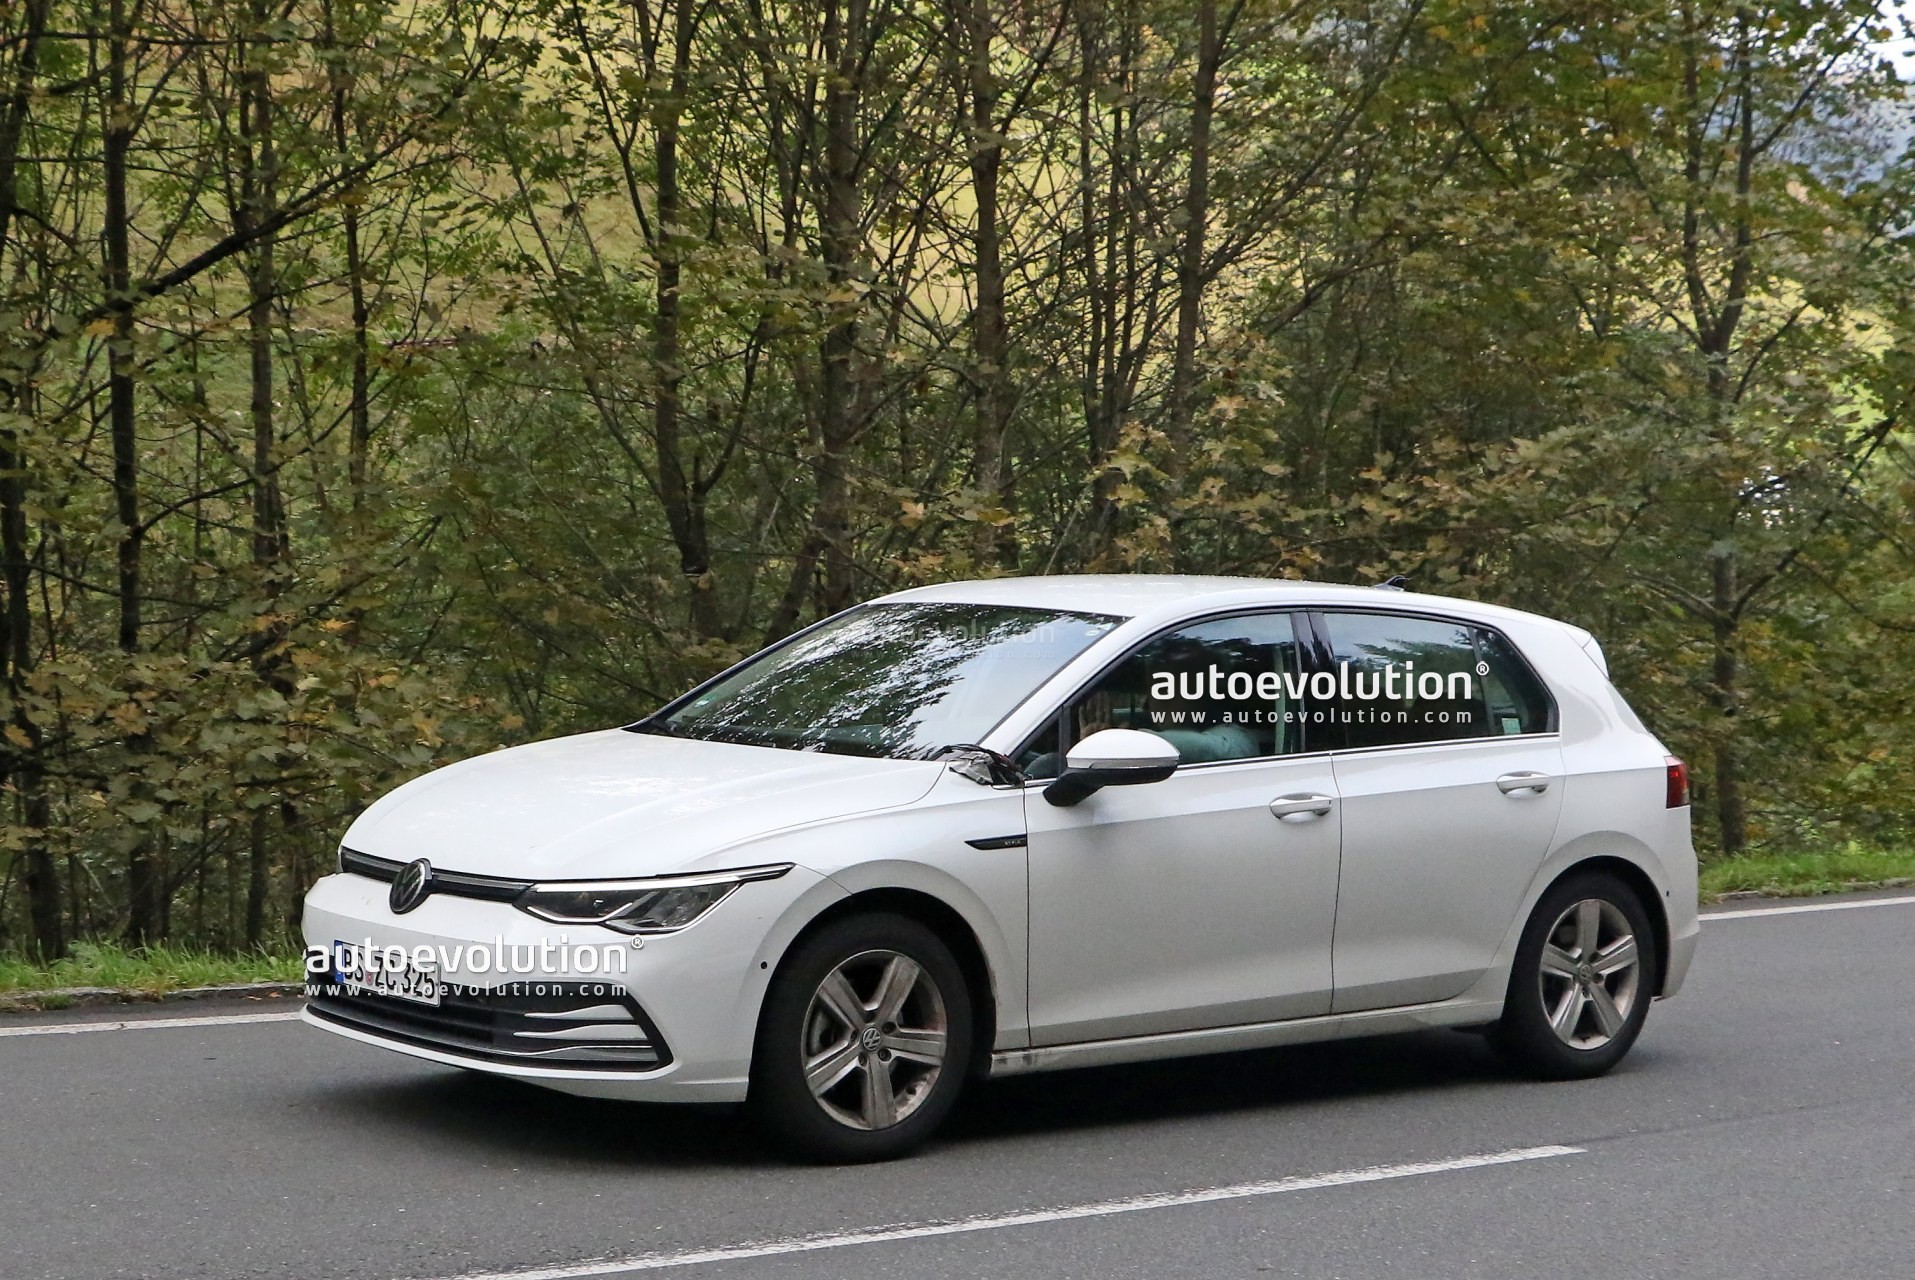 2024 Volkswagen Golf 8 Facelift Spied For The First Time Has A Massive Screen 199936 1 